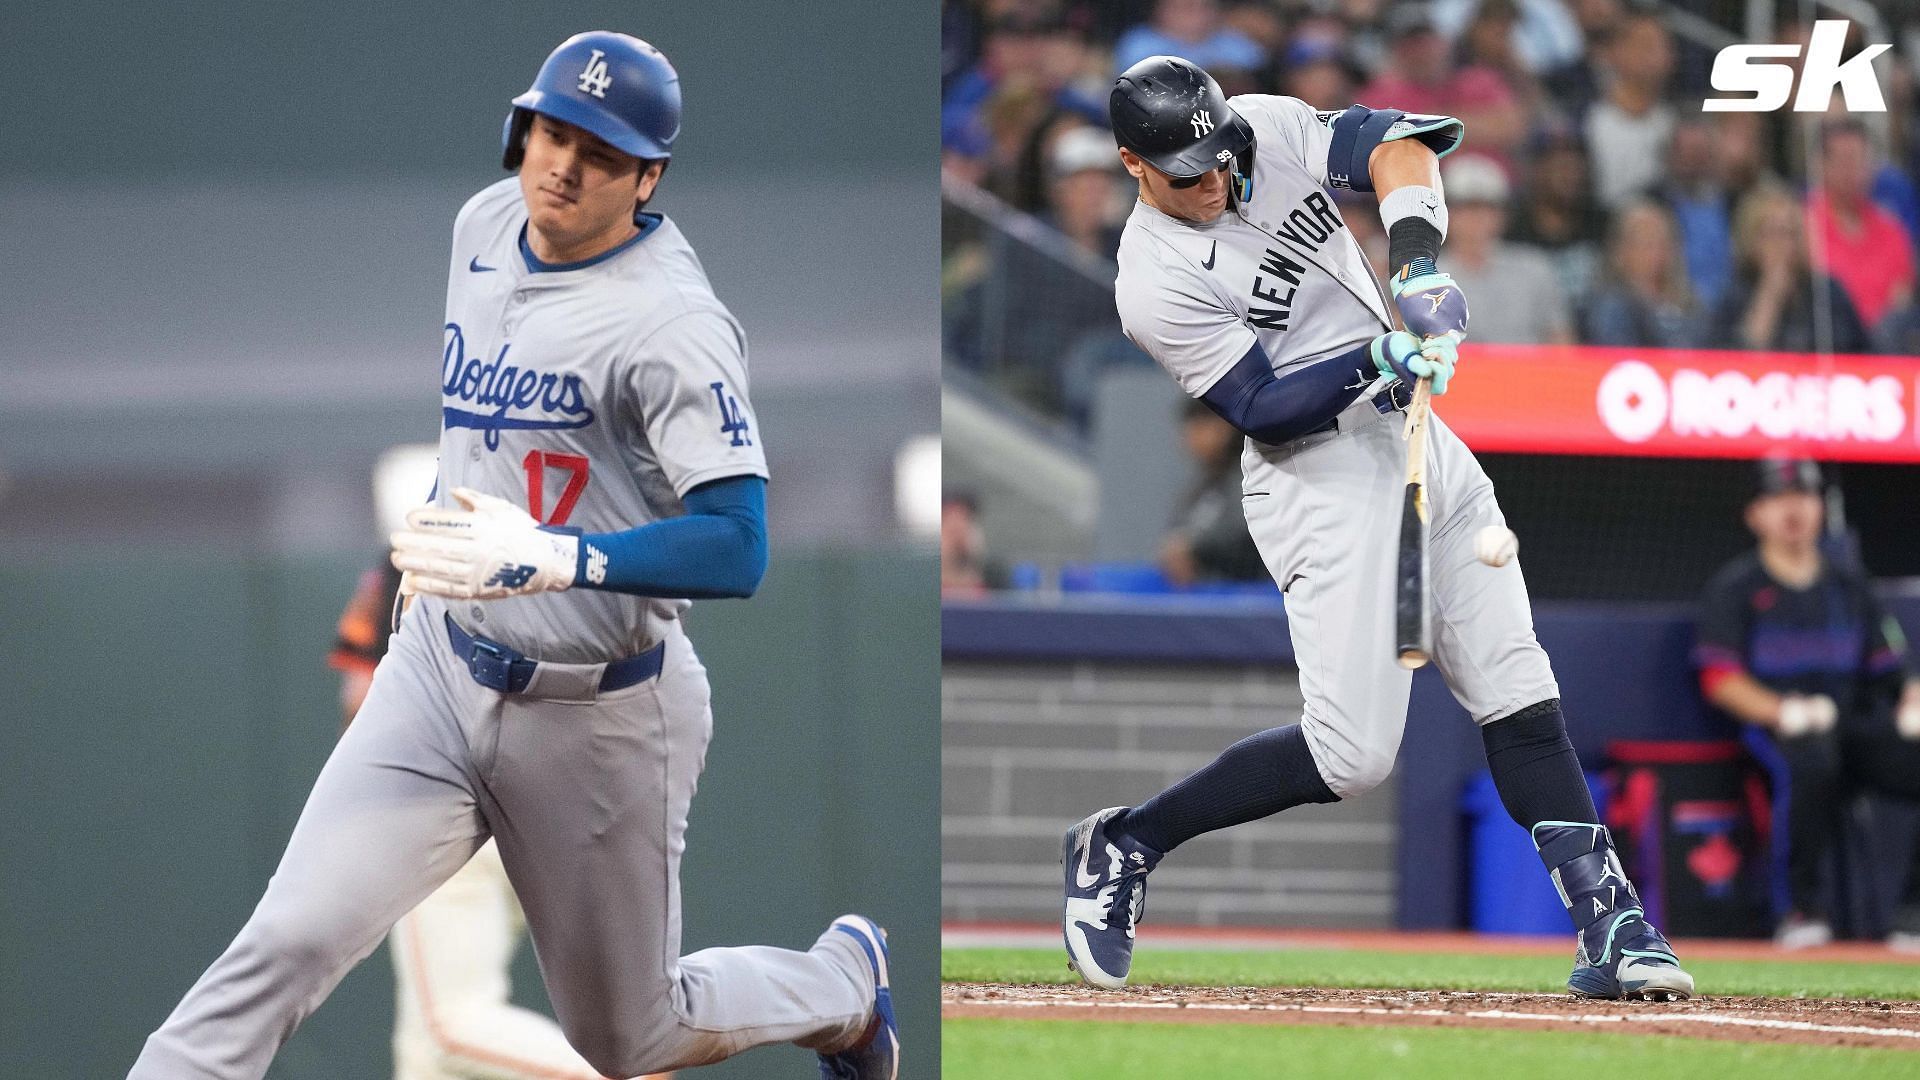 Shohei Ohtani and Aaron Judge both have the opportunity to win the Triple Crown this season